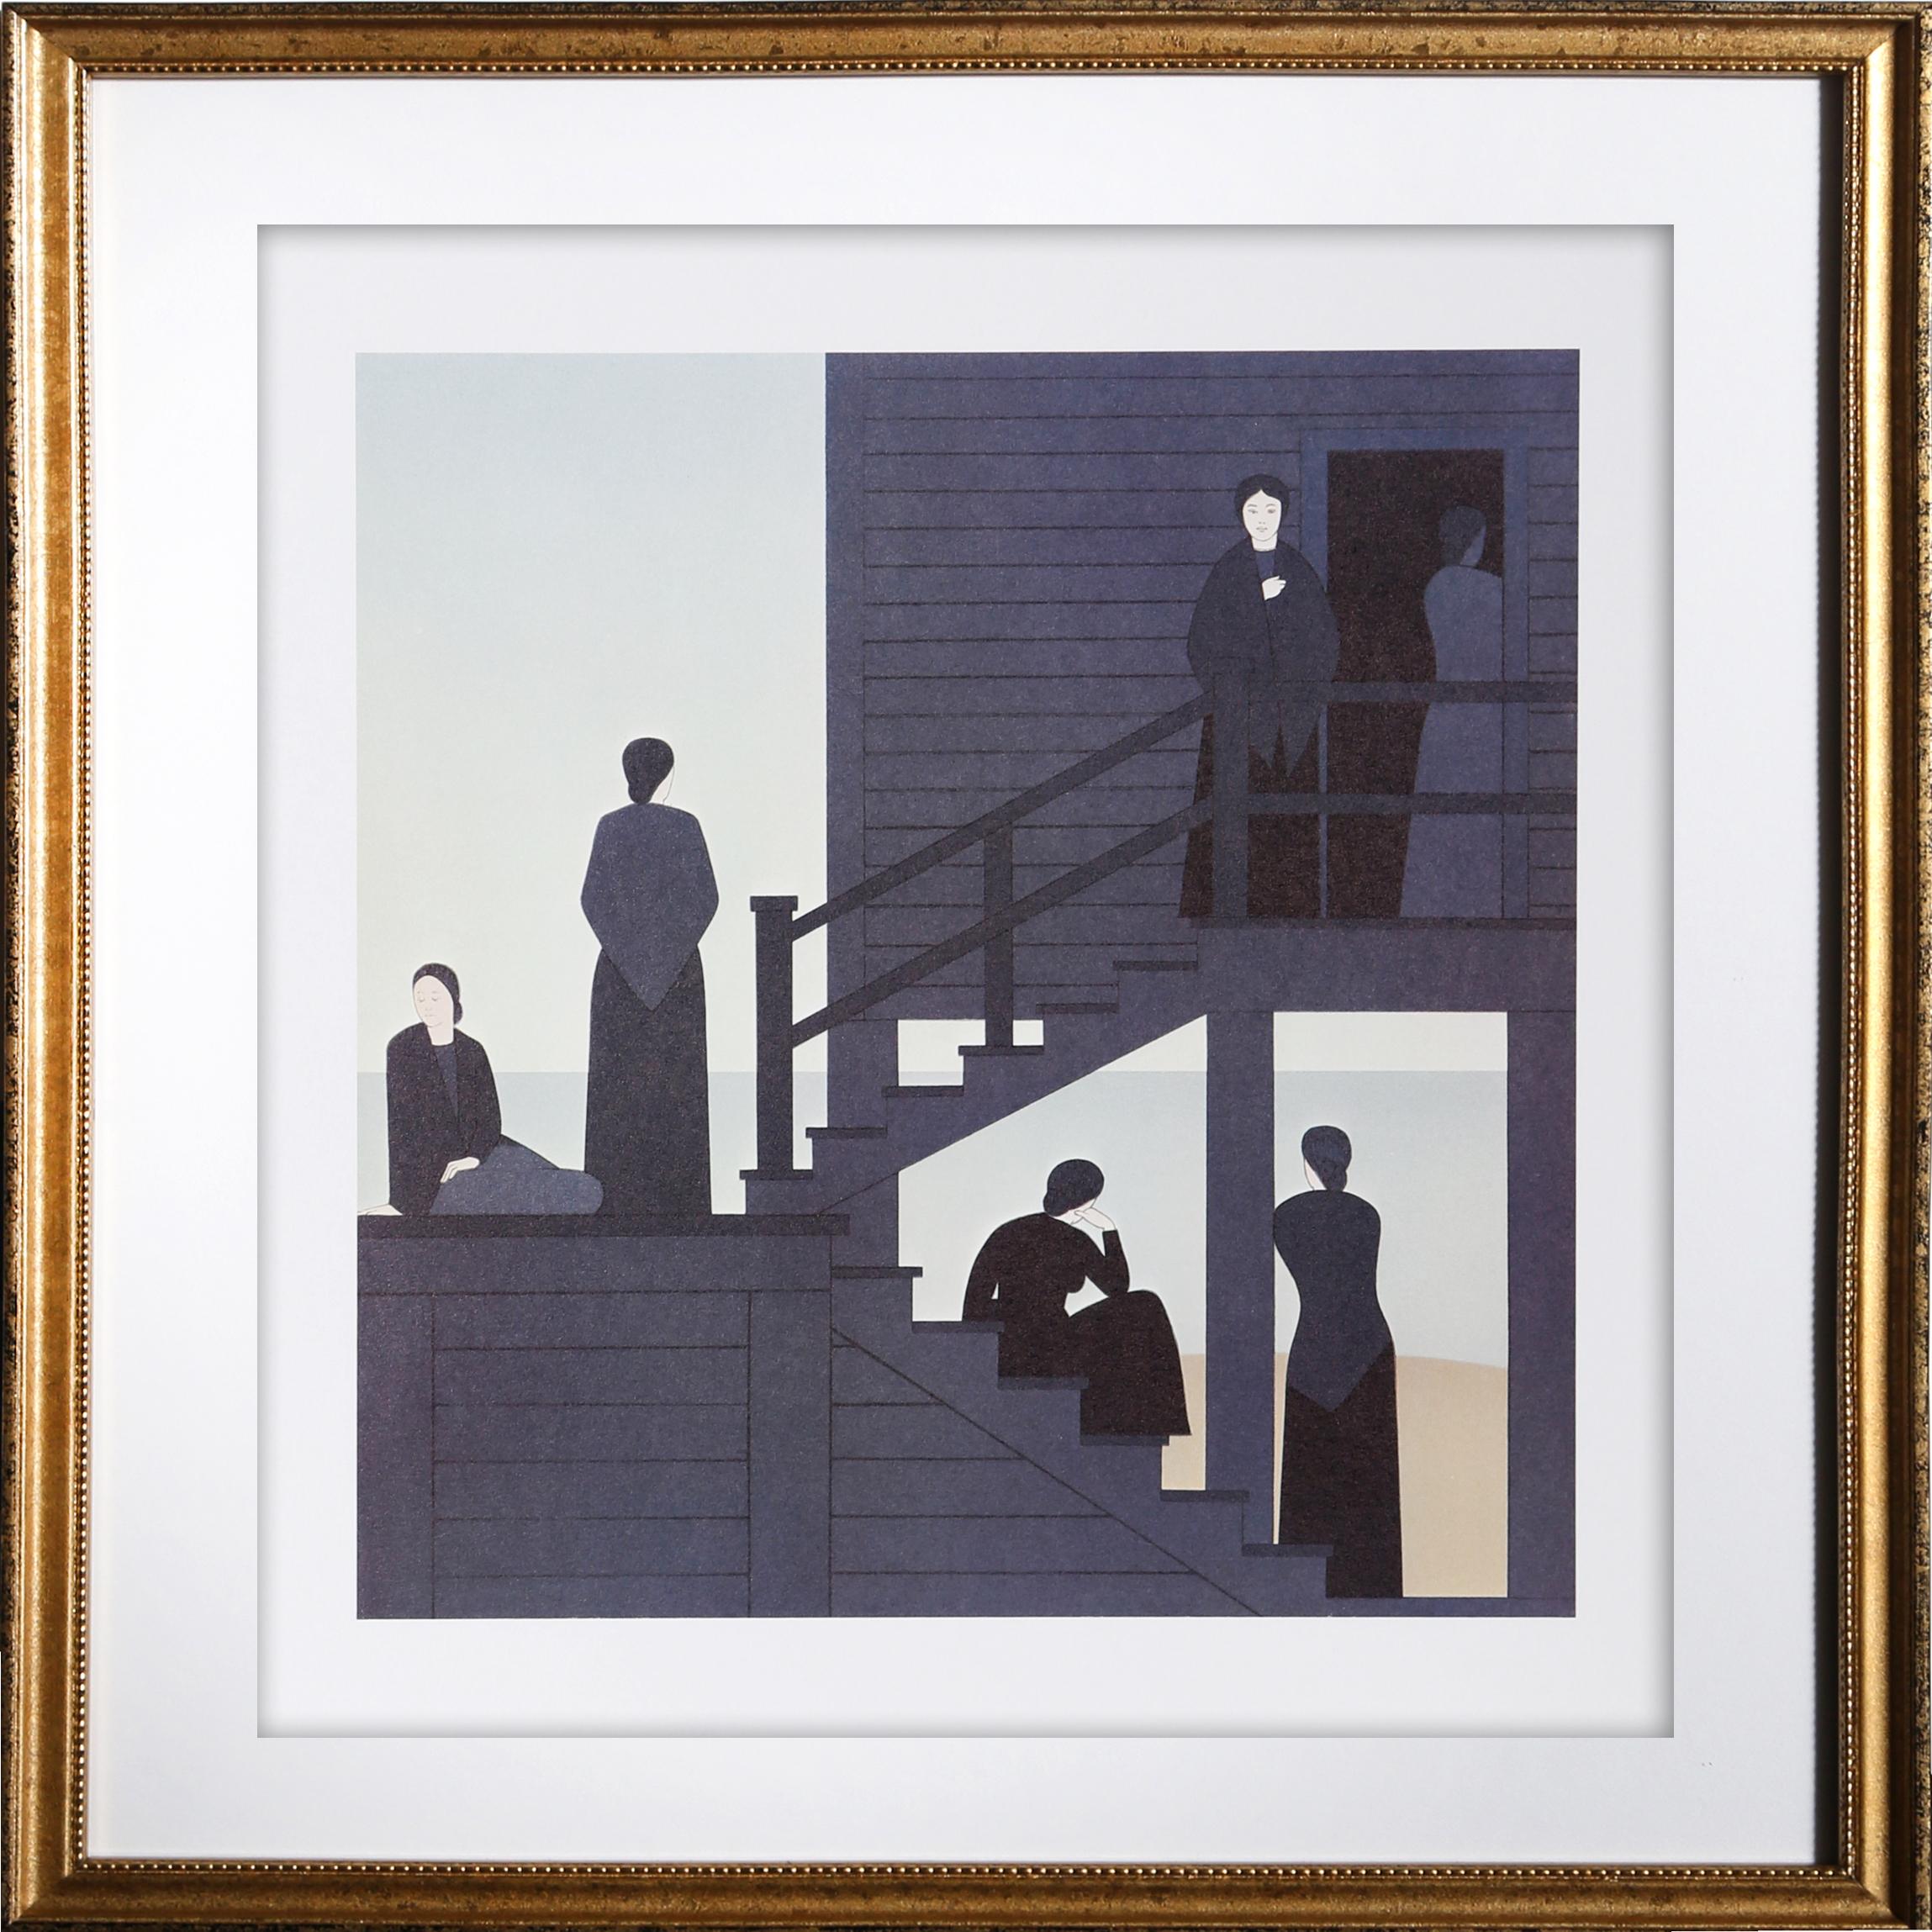 Waiting from the Kent Bicentennial Portfolio
Will Barnet, American (1911–2012)
Date: 1975
Offset Lithograph (unsigned)
Image Size: 11.25 x 11 inches
Size: 17 x 14 in. (43.18 x 35.56 cm)
Frame Size: 19 x 19 inches
Publisher: Lorillard